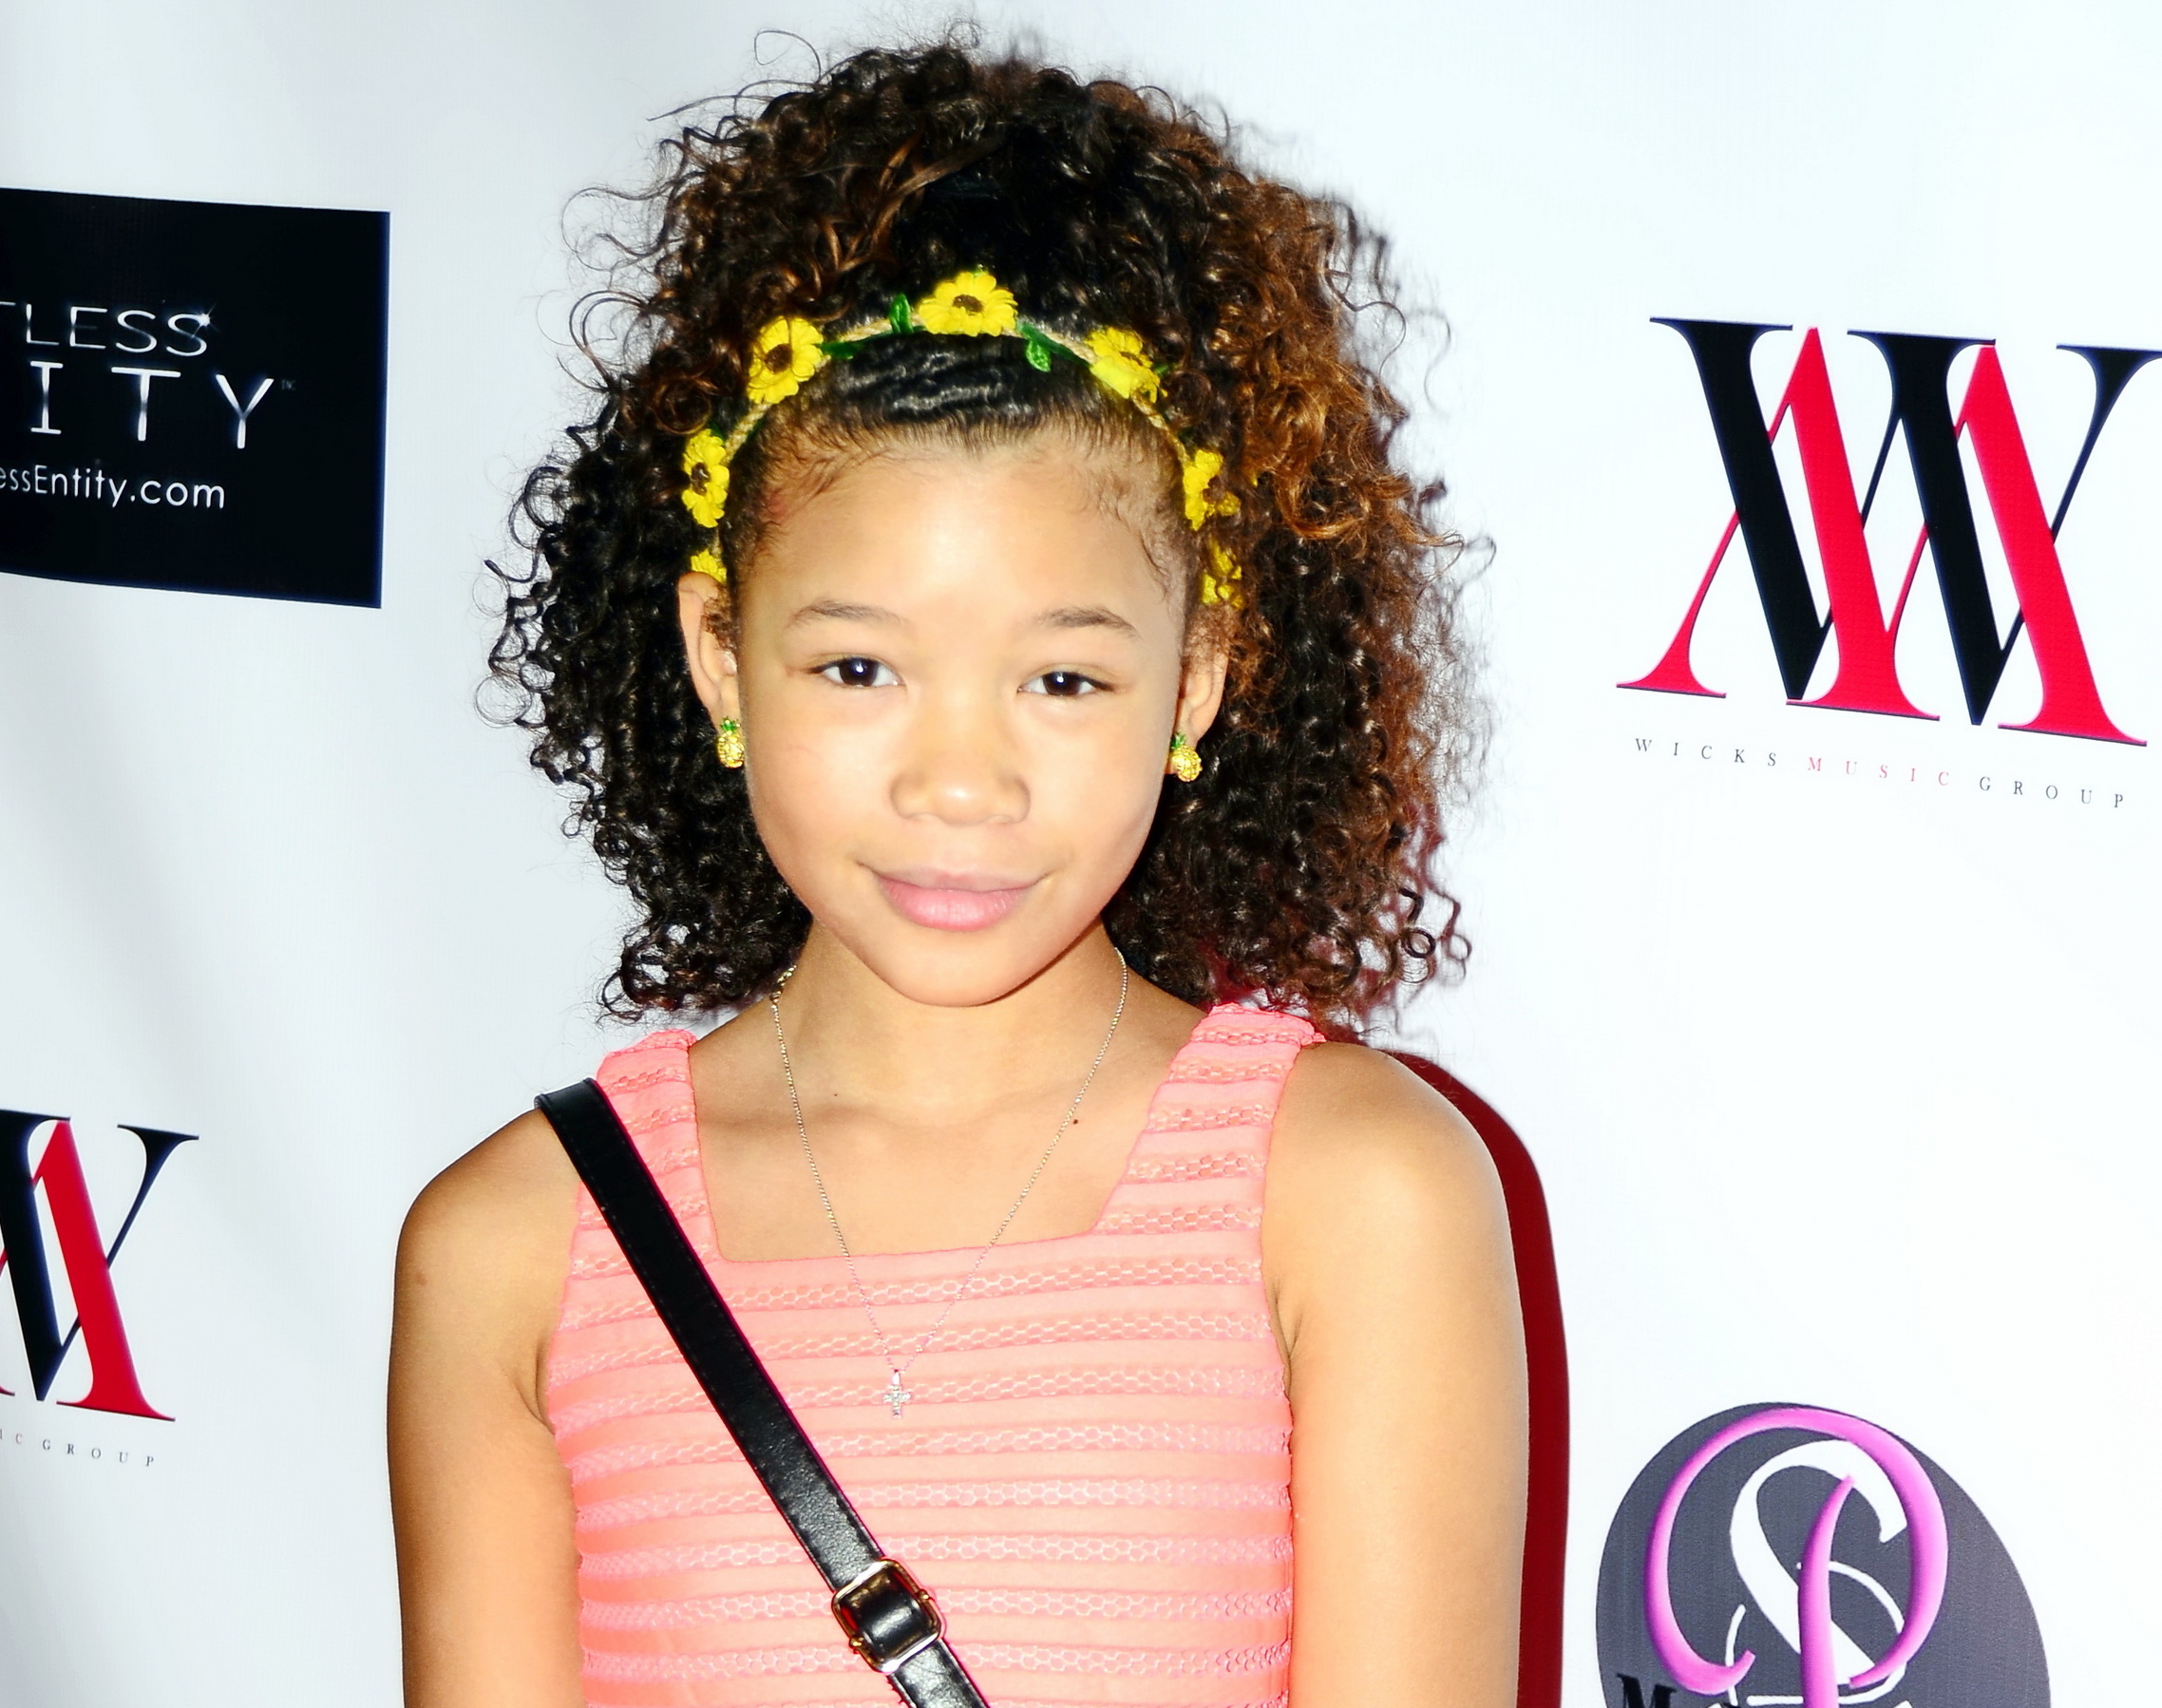 10/27/2015 - Storm Reid - Greg Marks' "Too Late" Single Video Release Party at the Eleven Studios in Glendale - The Eleven Studios, 671 W Broadway #104 - Glendale, CA, USA - Keywords: The Eleven Studio, Greg Marks, recording artists, Too Late, hip hop, music, celebrity, hollywood events, red carpet, arrivals Orientation: Portrait Face Count: 1 - False - Photo Credit: Sir Jones / PRPhotos.com - Contact (1-866-551-7827) - Portrait Face Count: 1